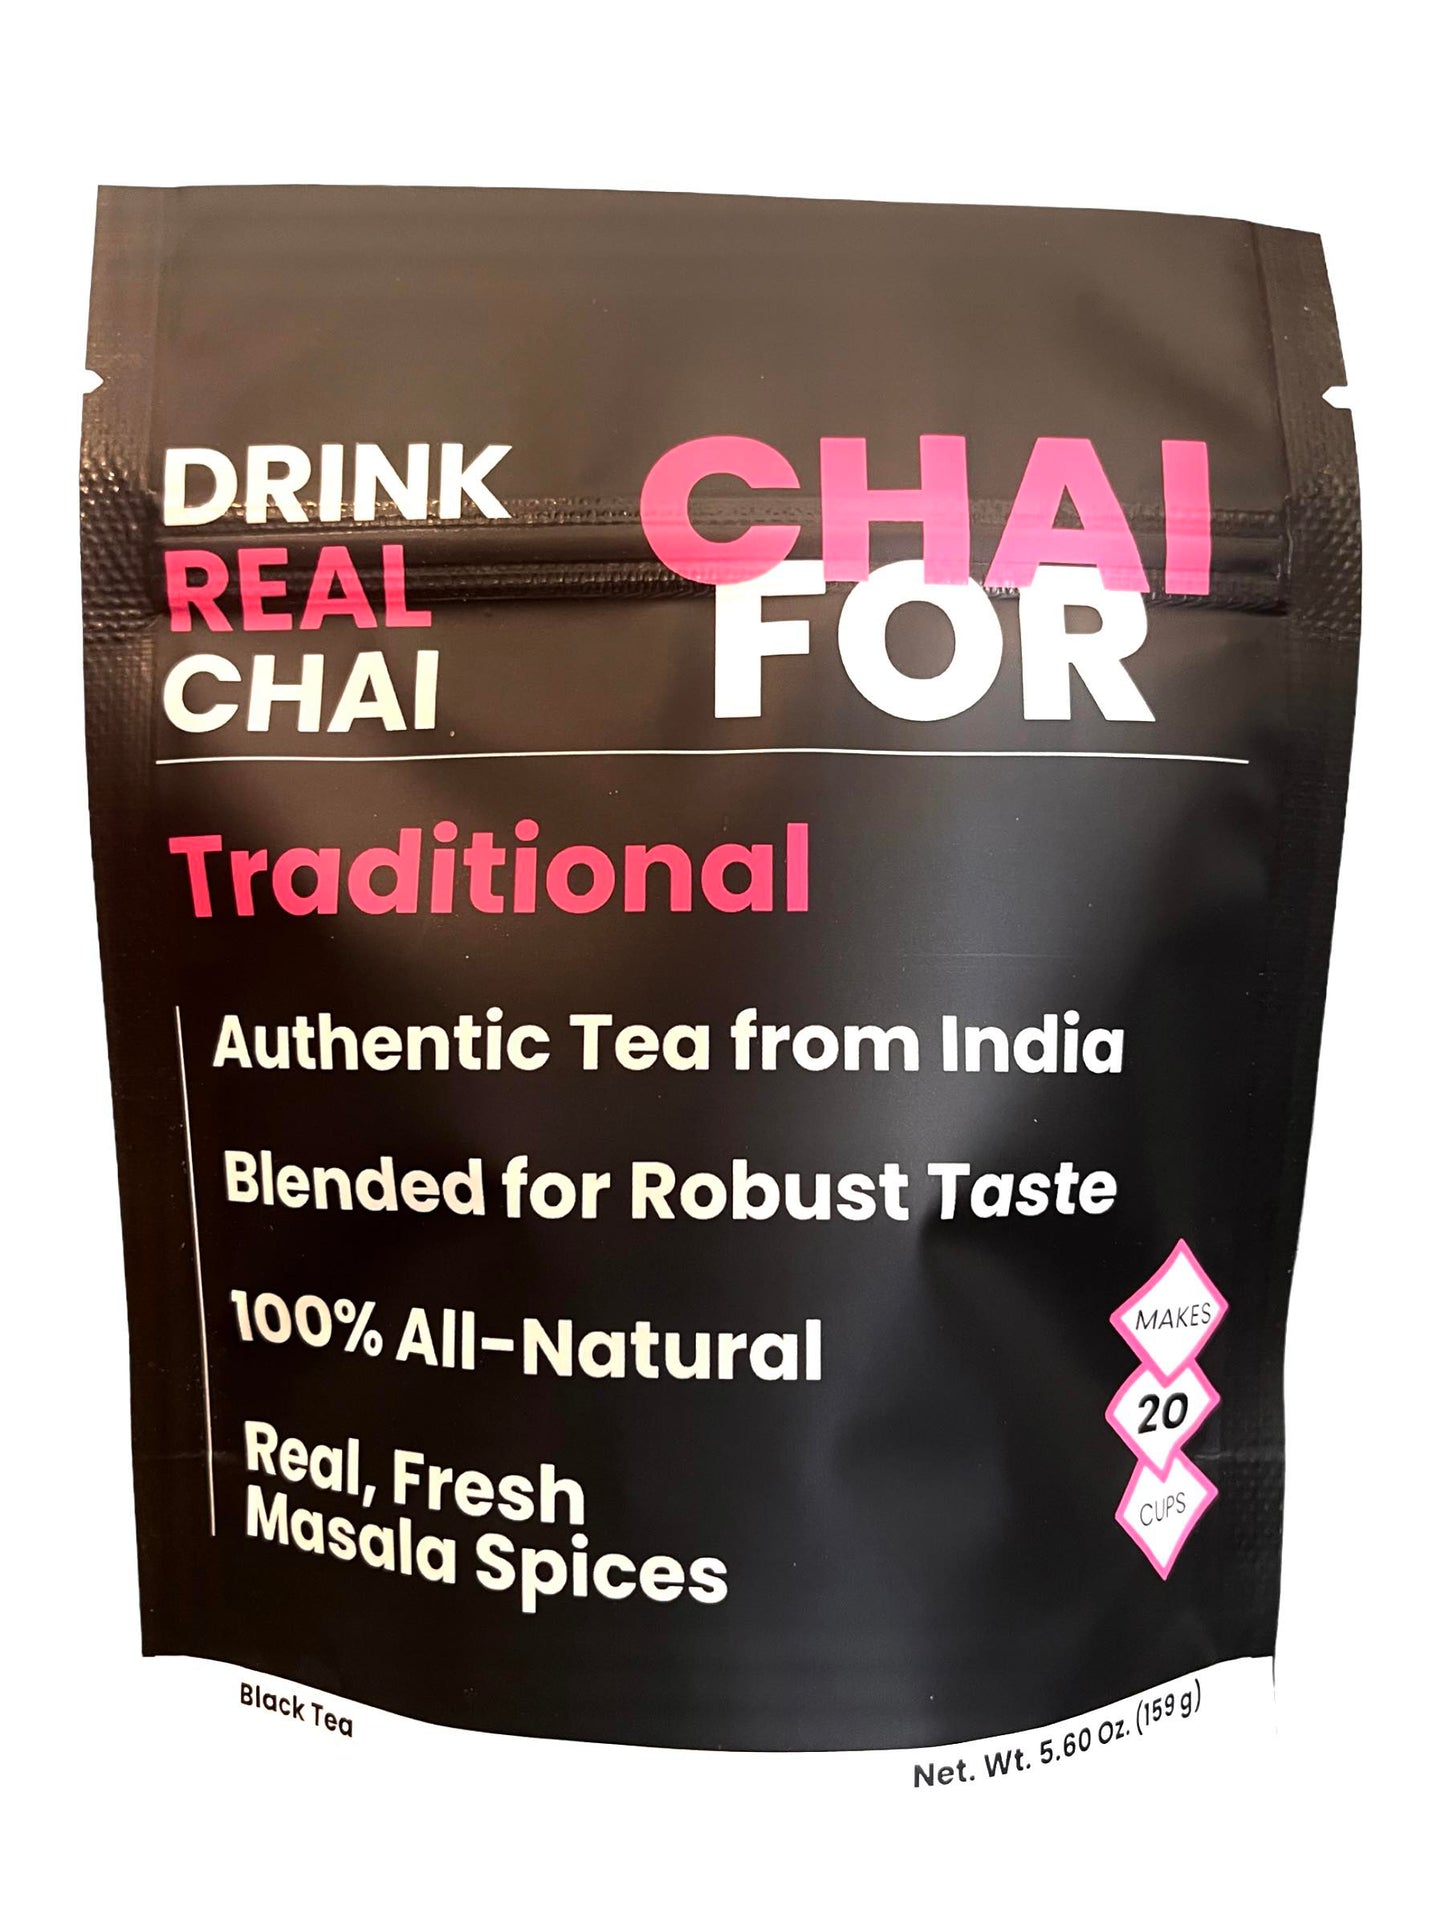 Traditional Chai packaging with the features of buying a bundle and save chai 